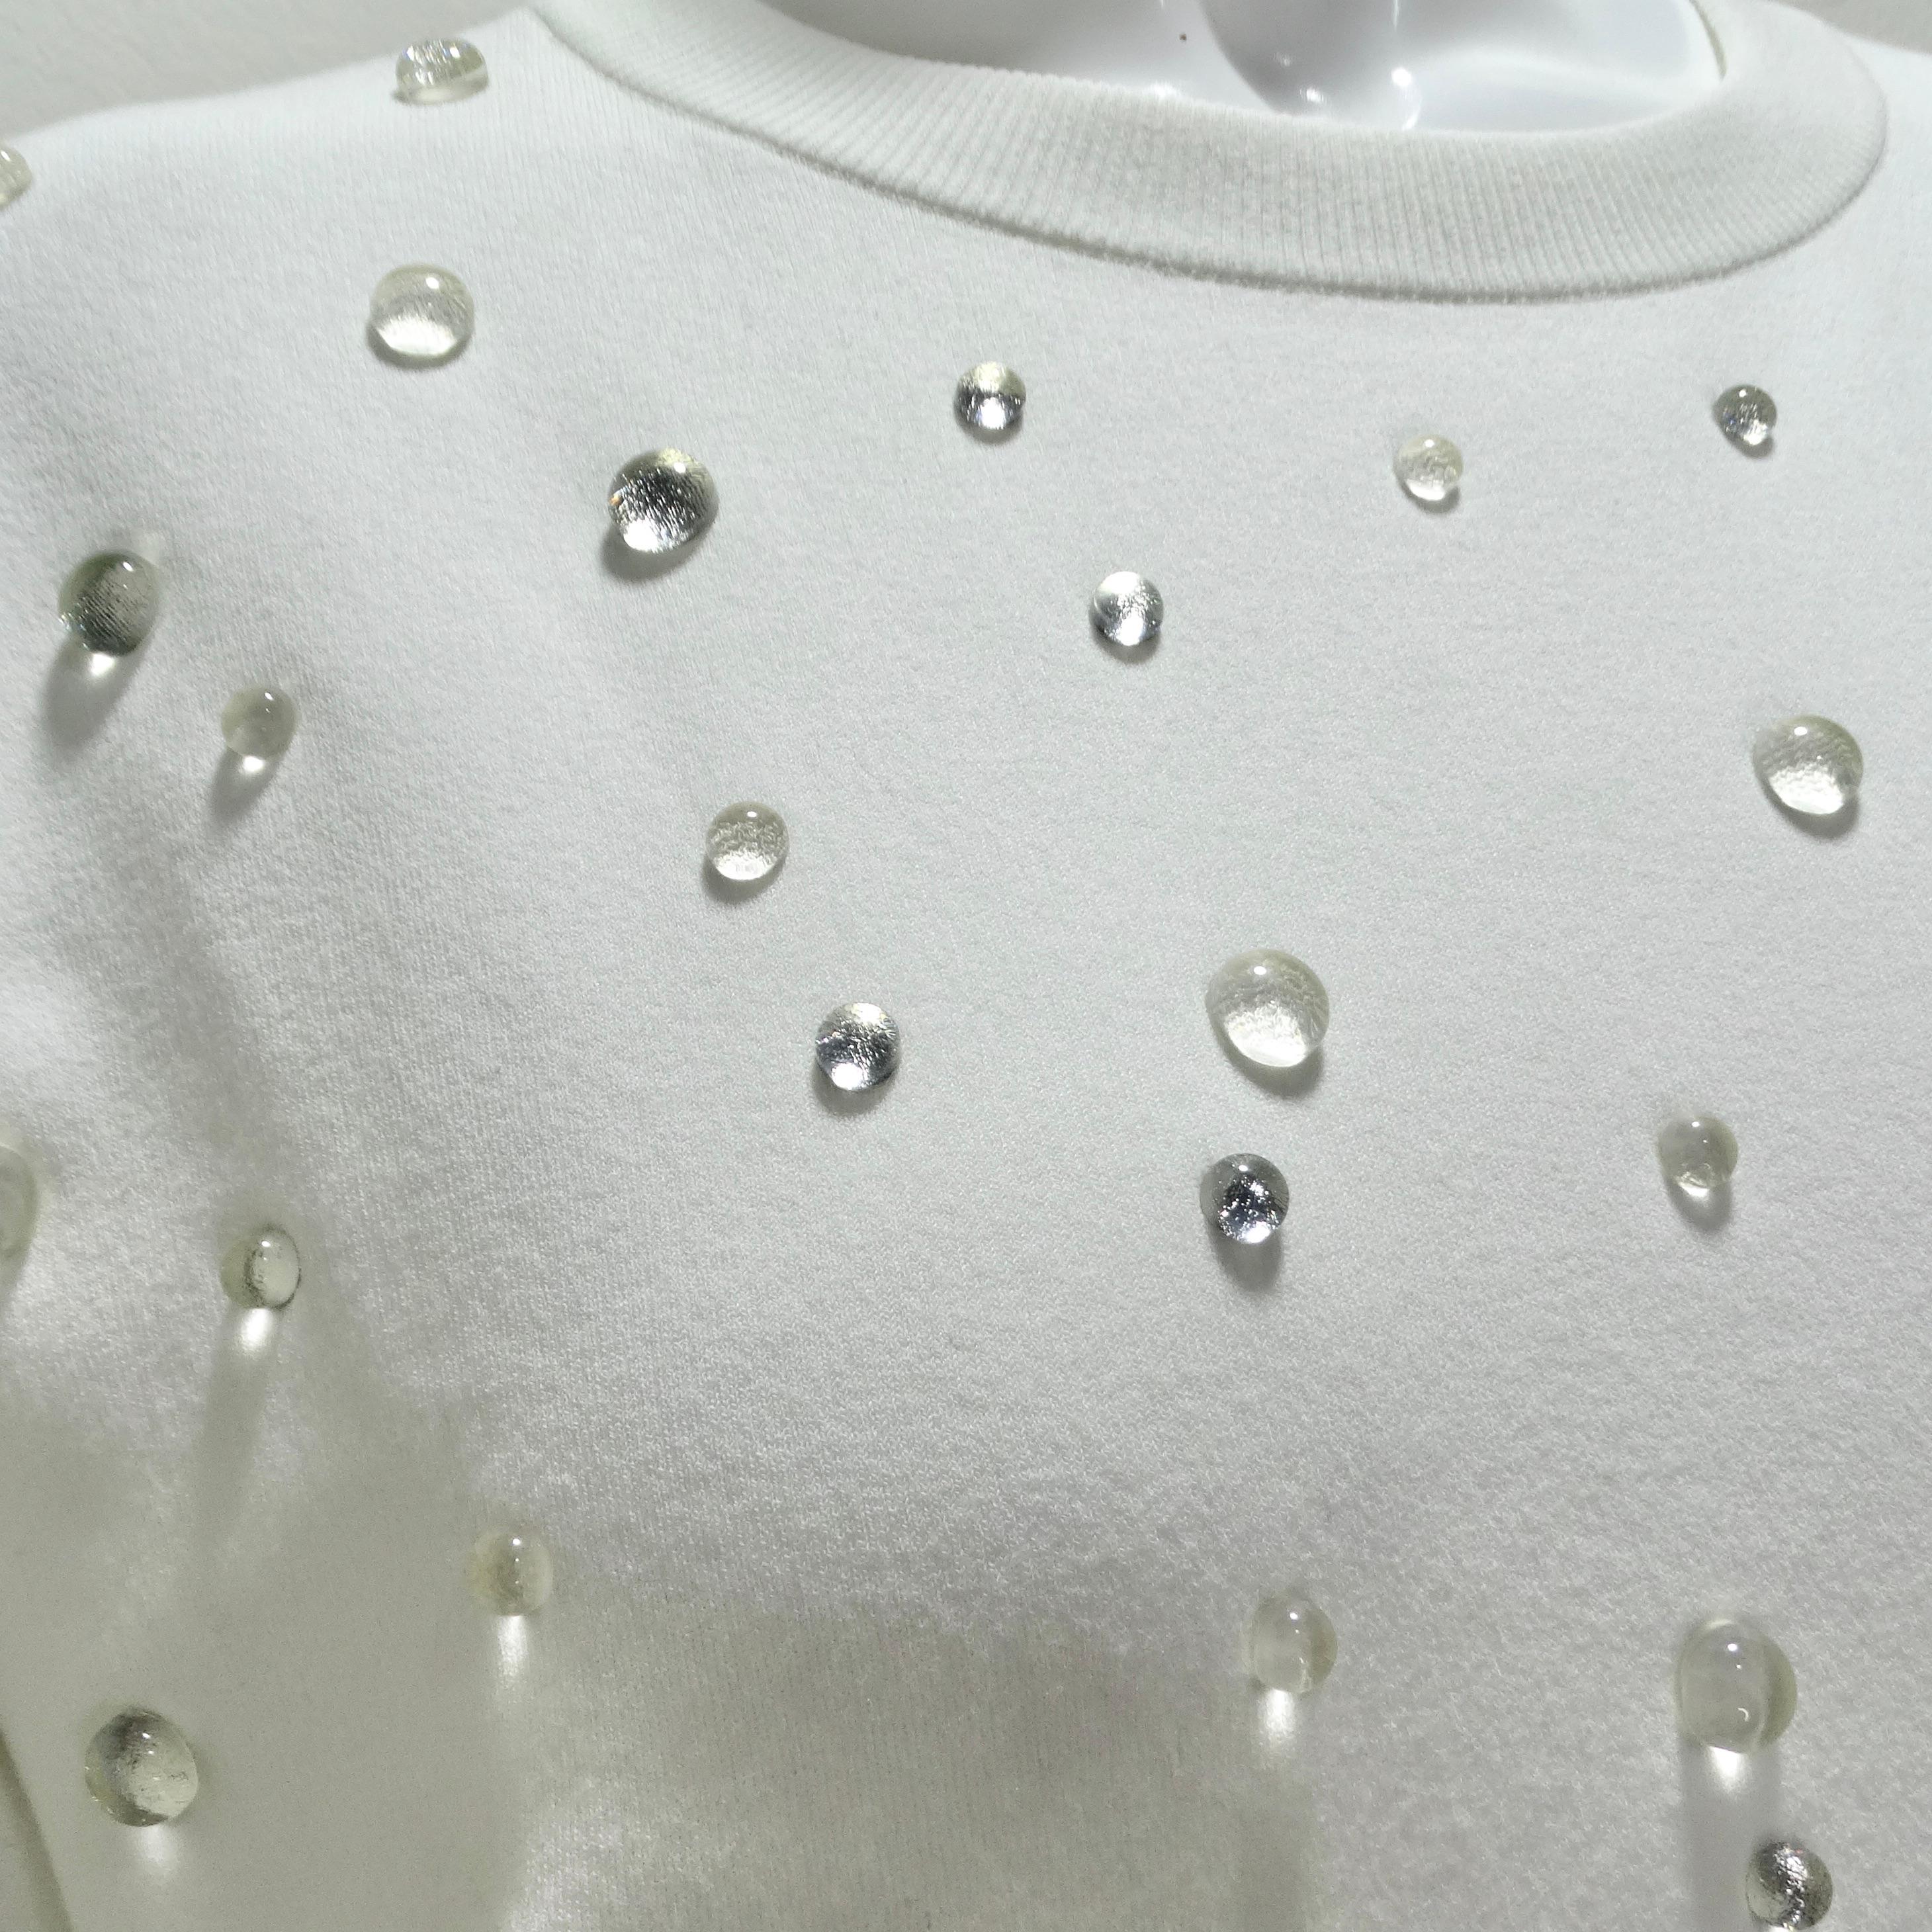 Chanel 2018 Water Drop Embellished Cotton Dress In Excellent Condition For Sale In Scottsdale, AZ